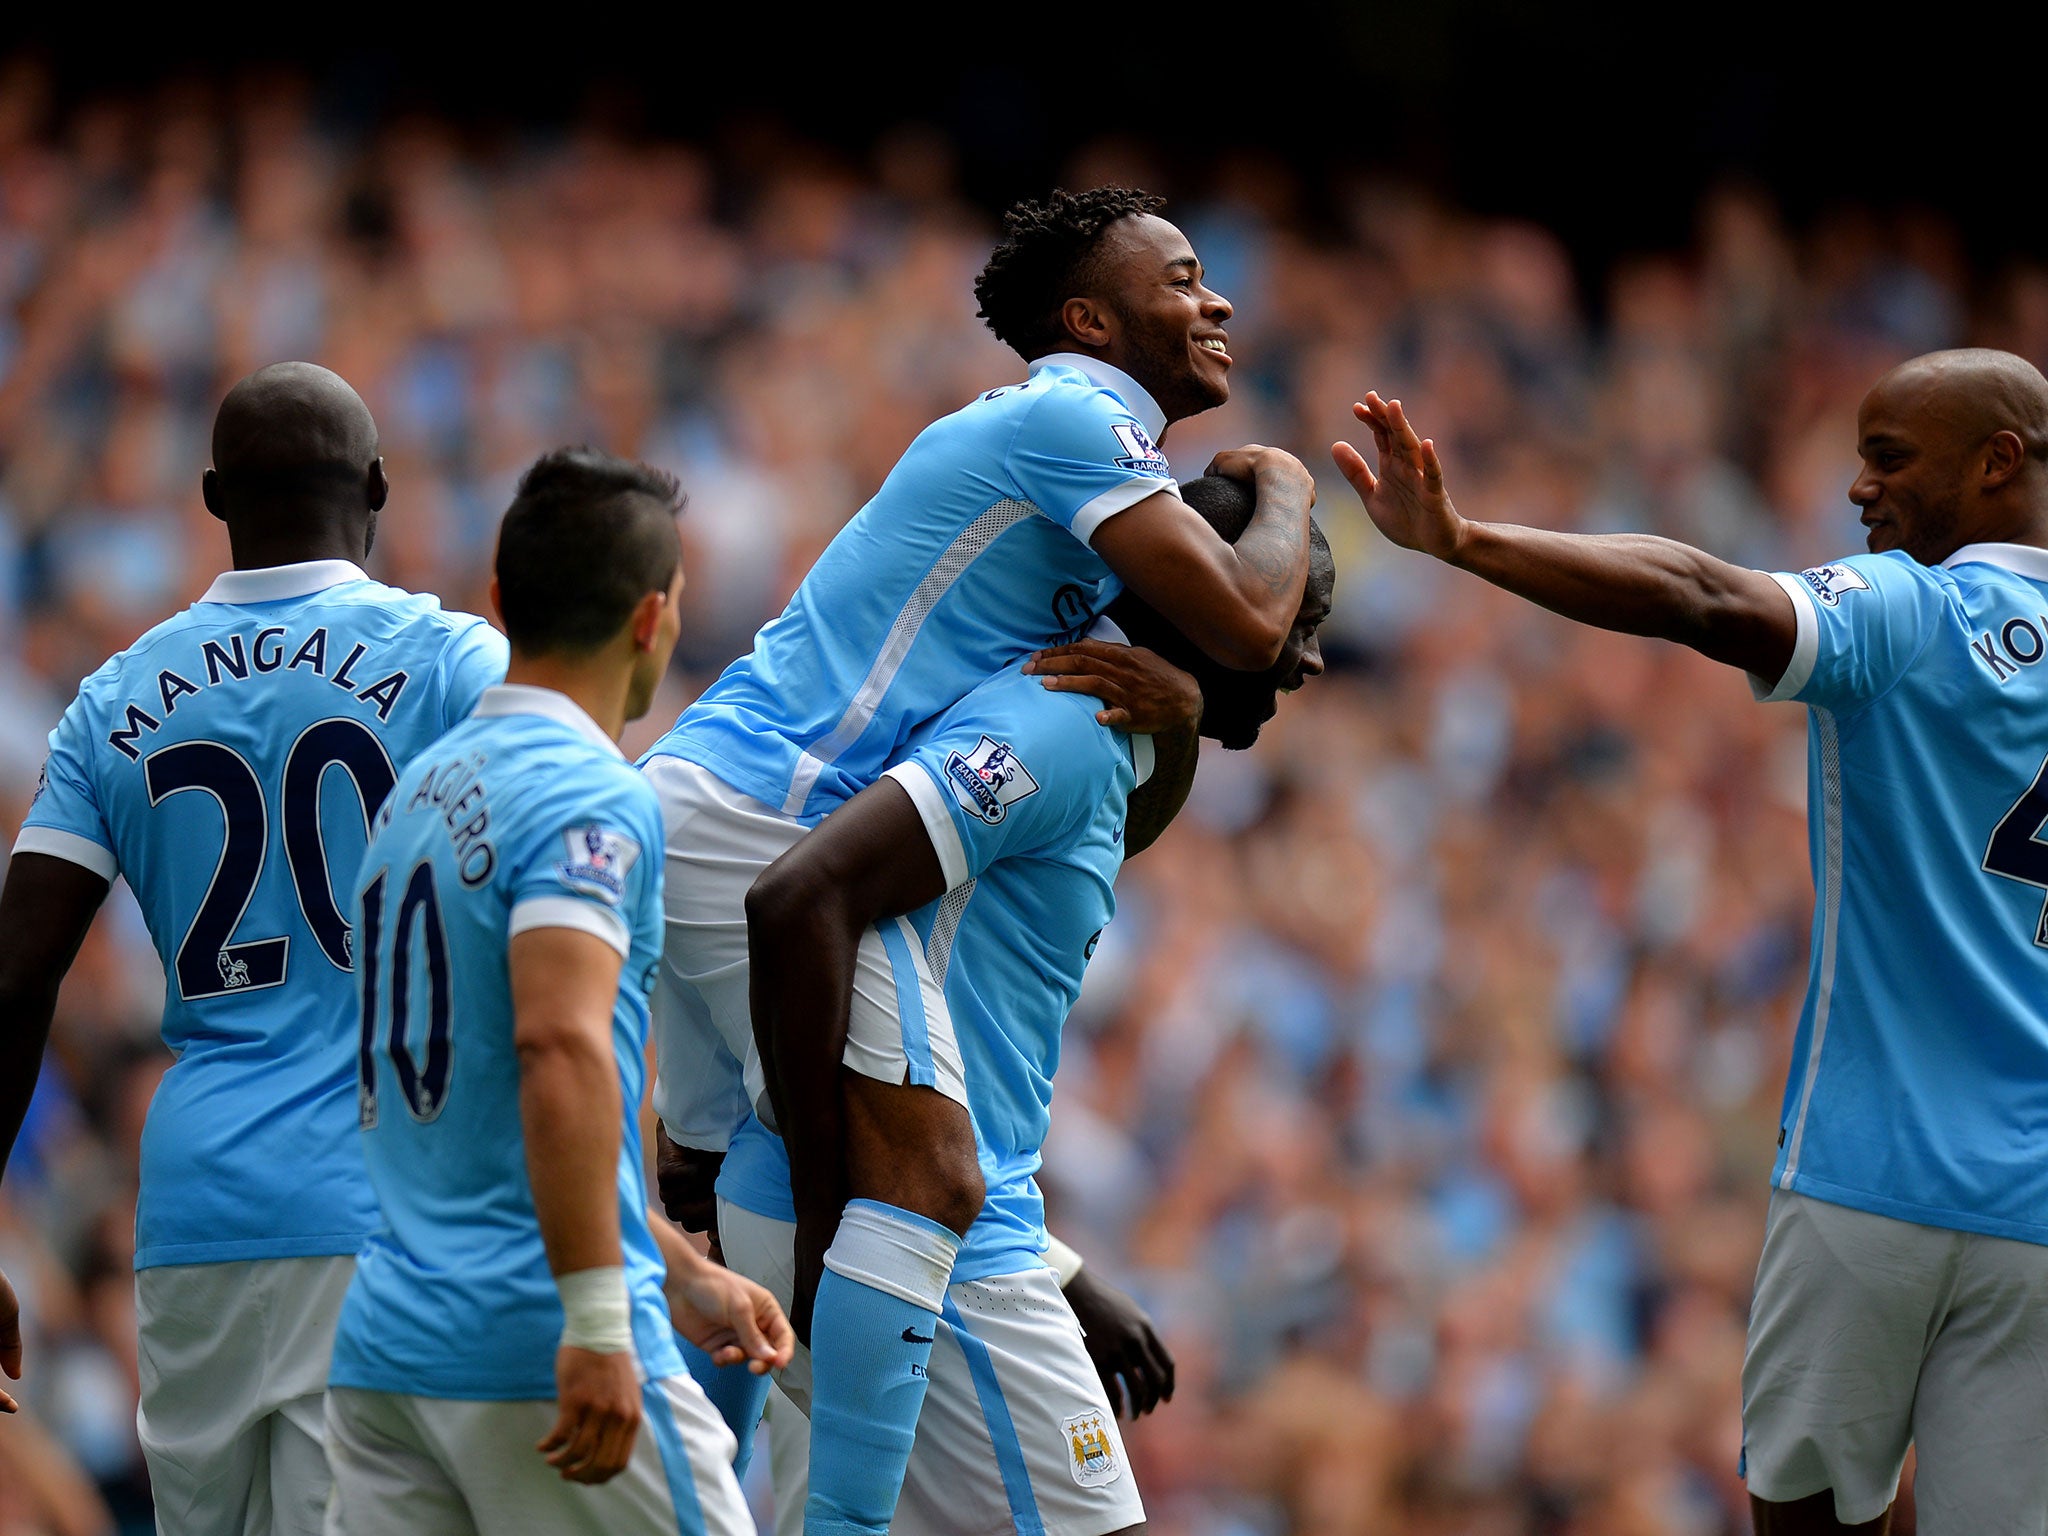 Raheem Sterling celebrates with his Manchester City team-mates